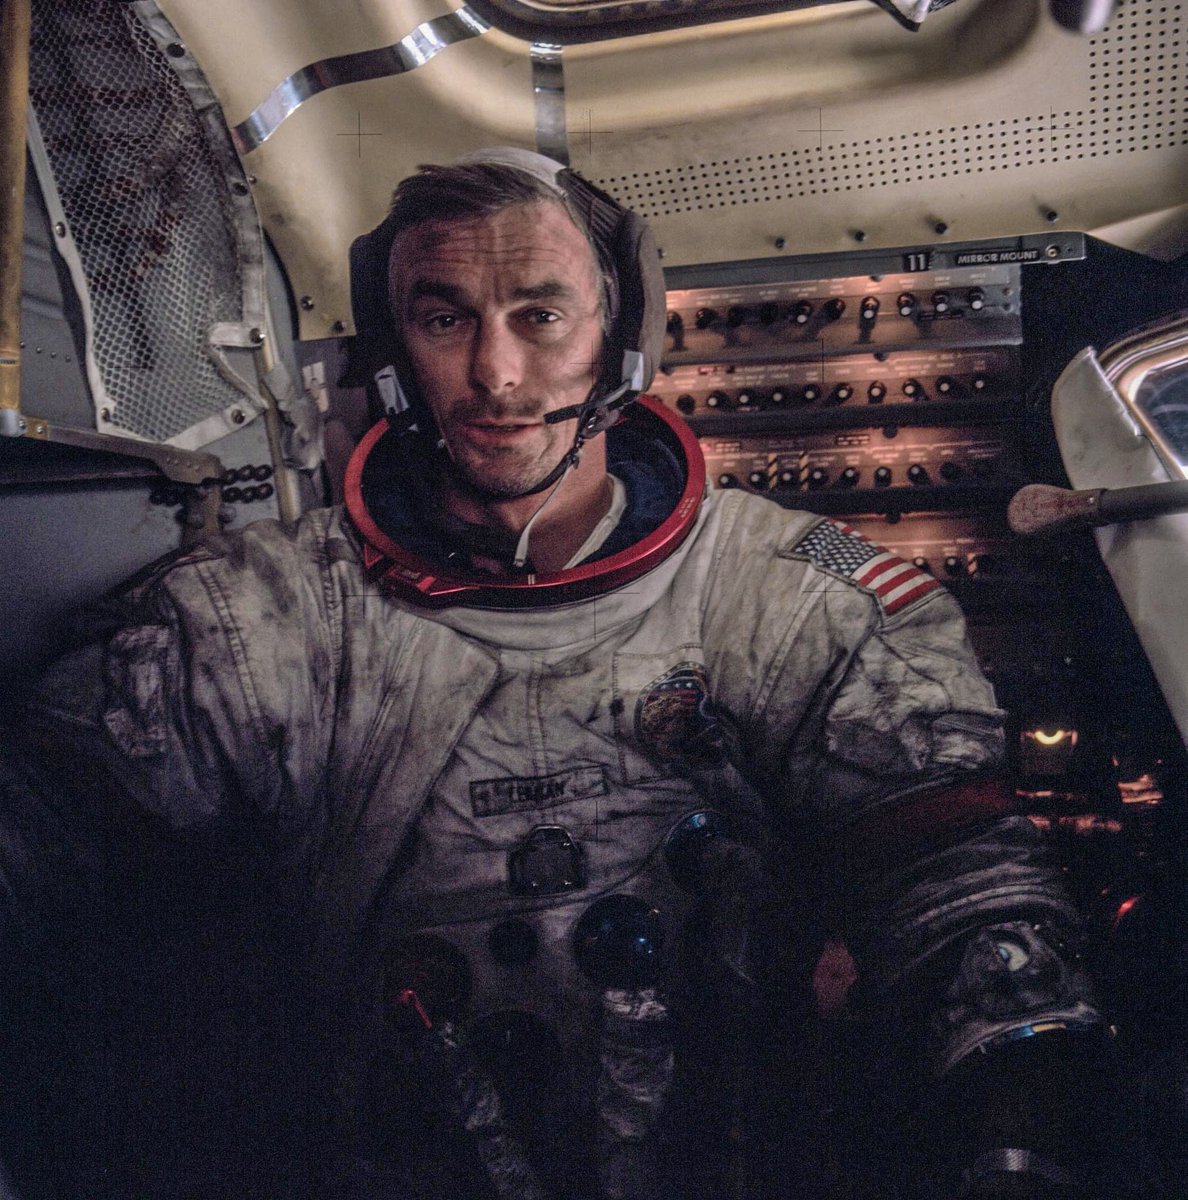 51 years ago this week, the astronauts of Apollo 17 left the moon.  I love this shot of Gene Cernan in the LM preparing for the ascent.  The last Apollo astronaut to leave footprints in lunar soil, he looks shattered.  Tested and pushed to the limit - but mission accomplished.